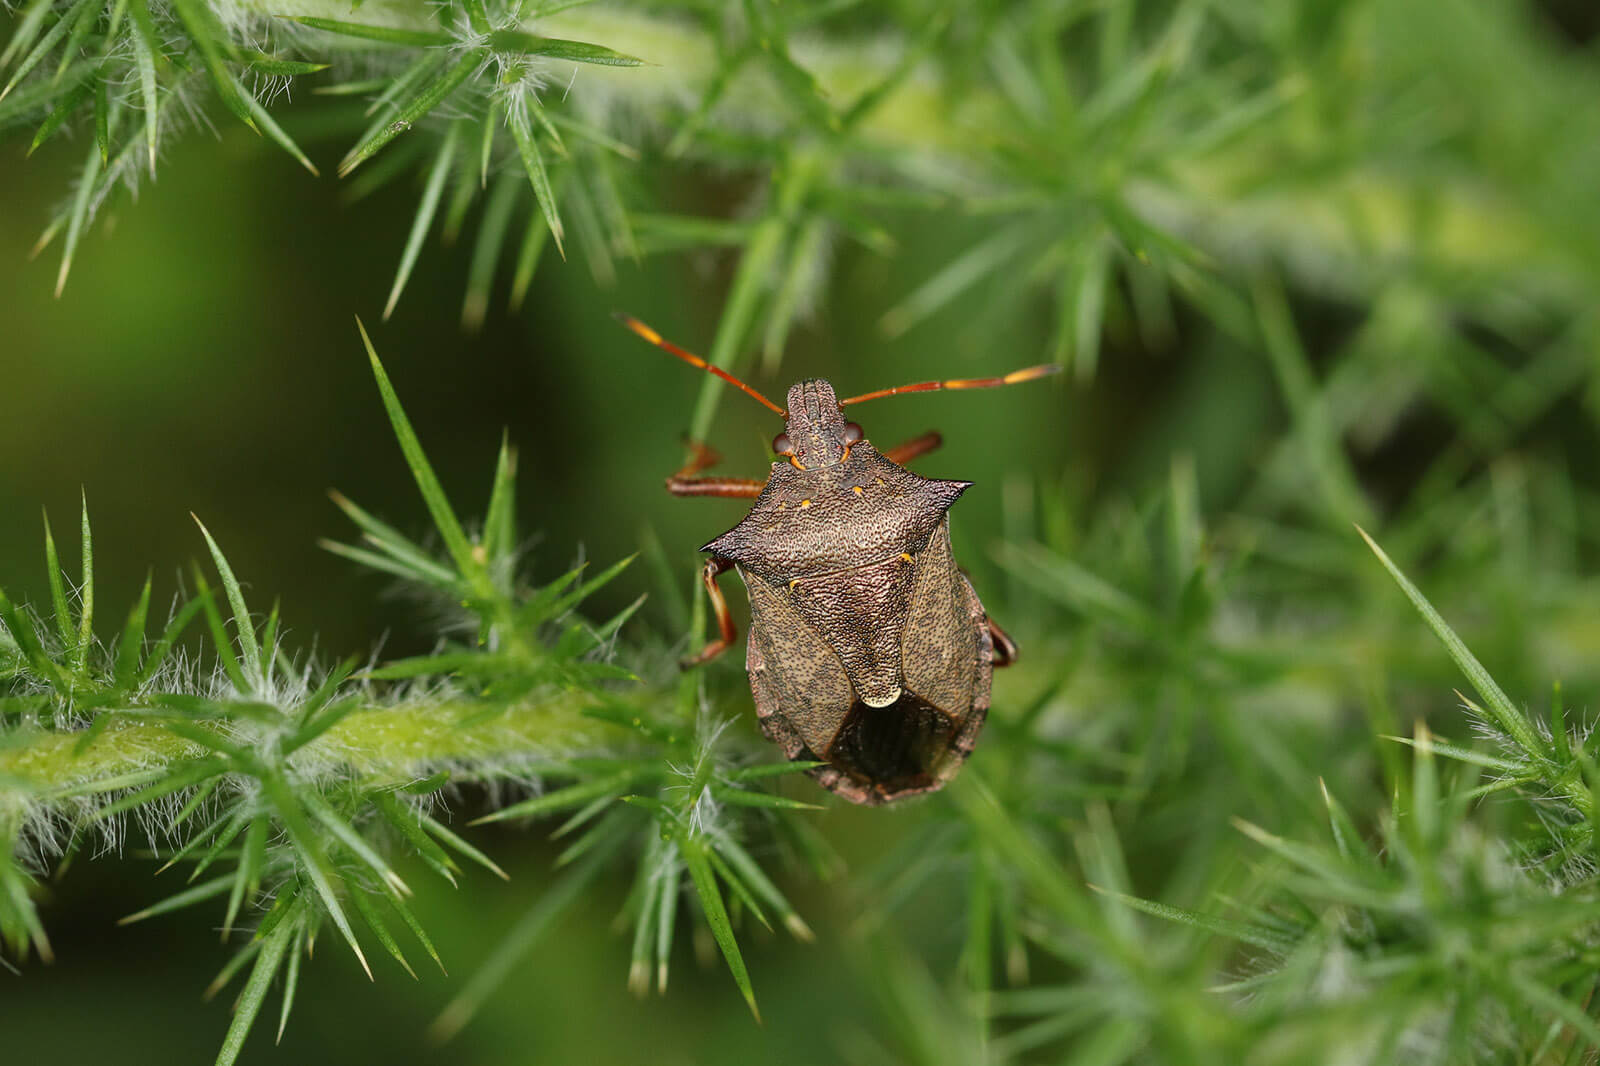 https://storables.com/wp-content/uploads/2023/07/how-to-get-rid-of-stink-bugs-in-the-garden-1688556127.jpg